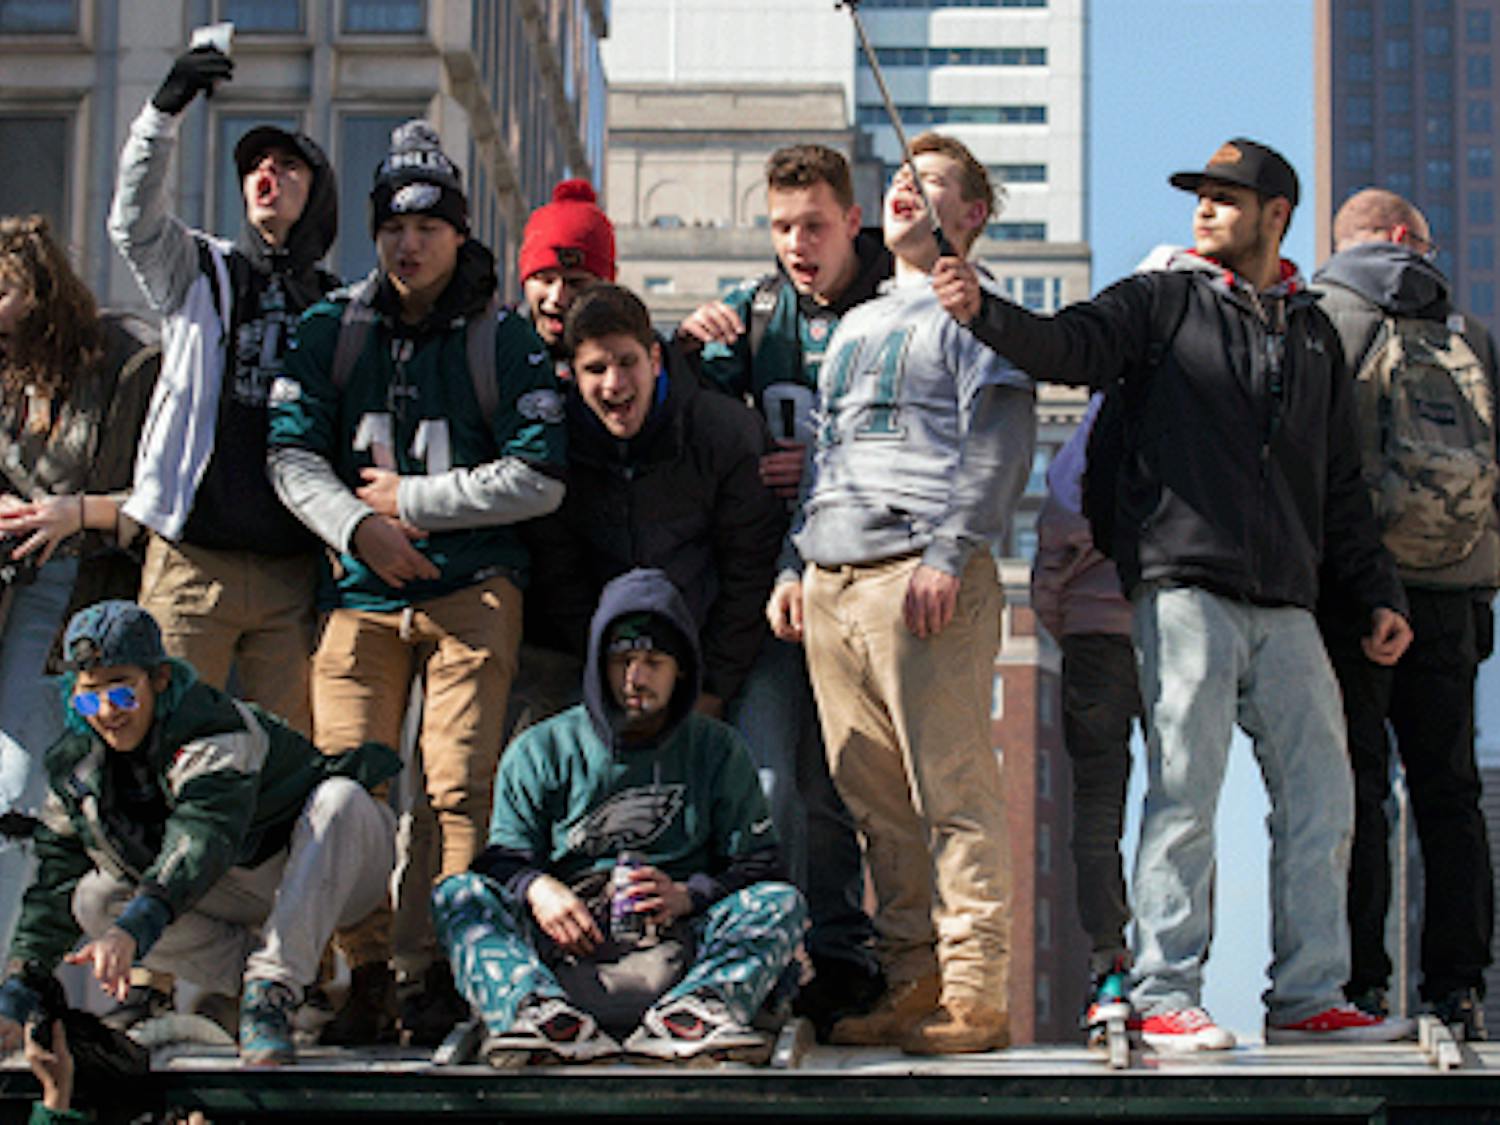 Temple students celebrating the Eagles advancement to the Superbowl | Source: Temple Now, Betsy Manning
